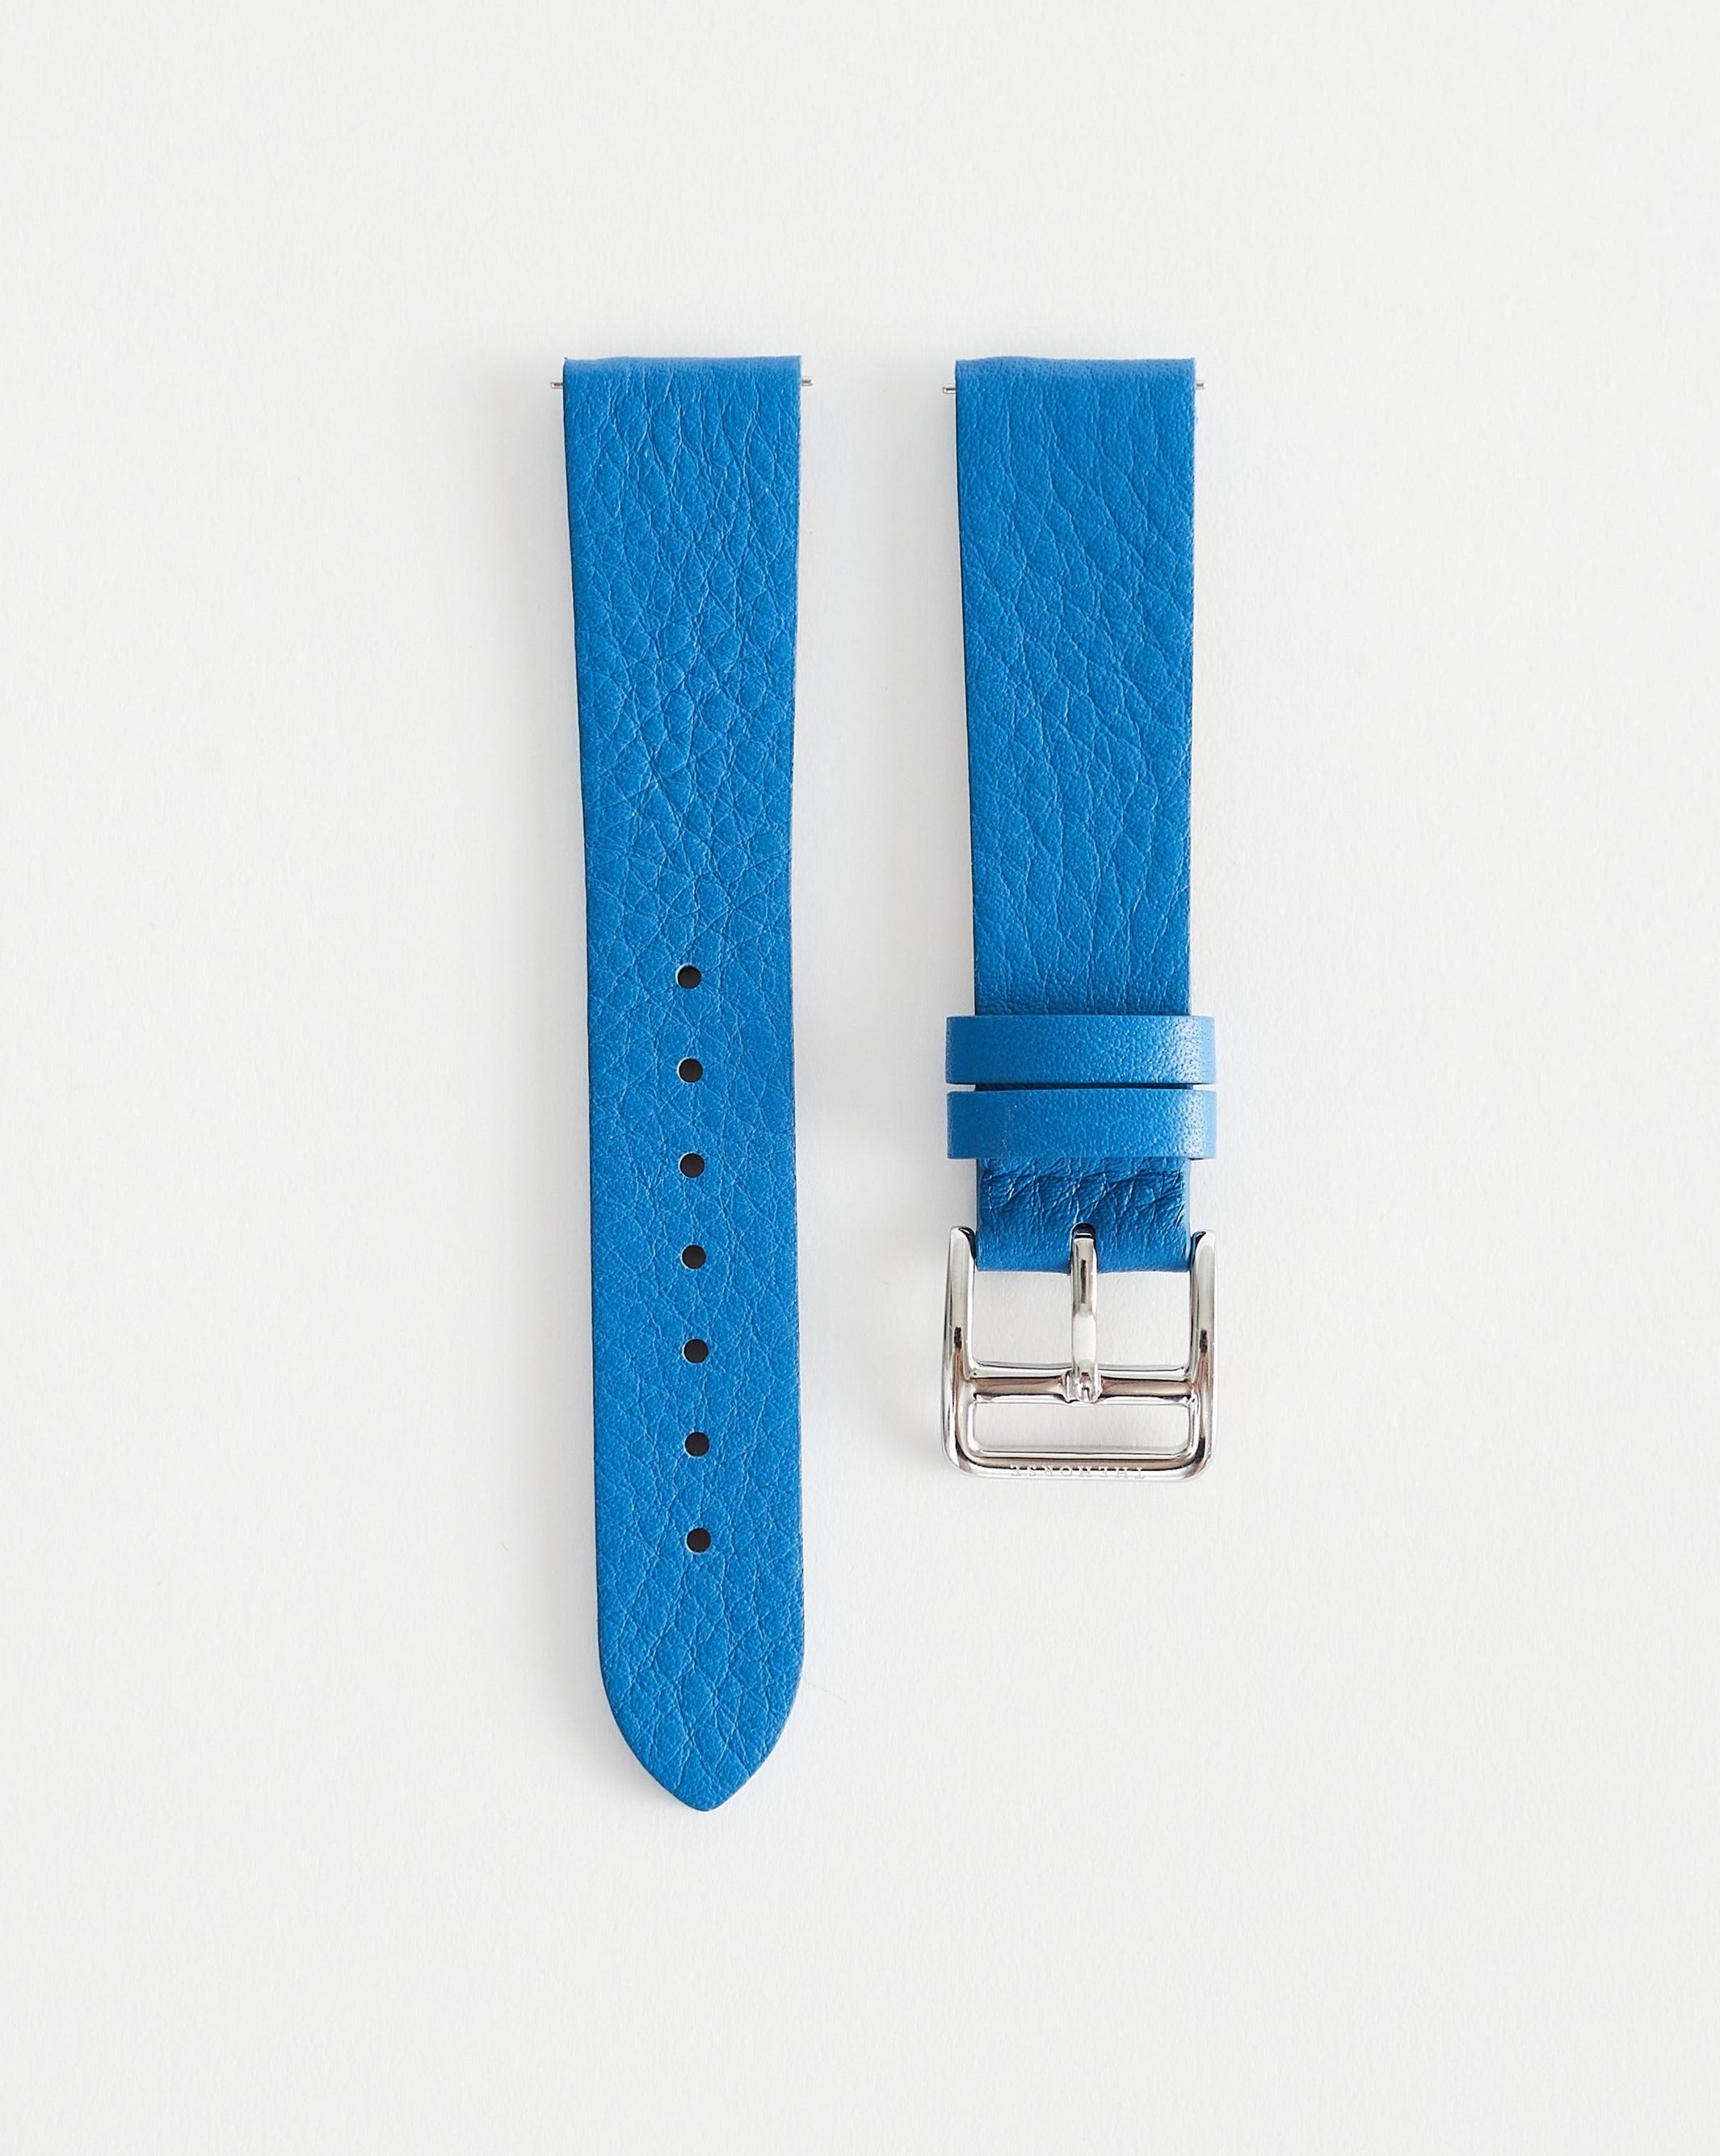 The 18mm Dress Watch Strap in Cobalt Leather / Polished Silver by The Horse®